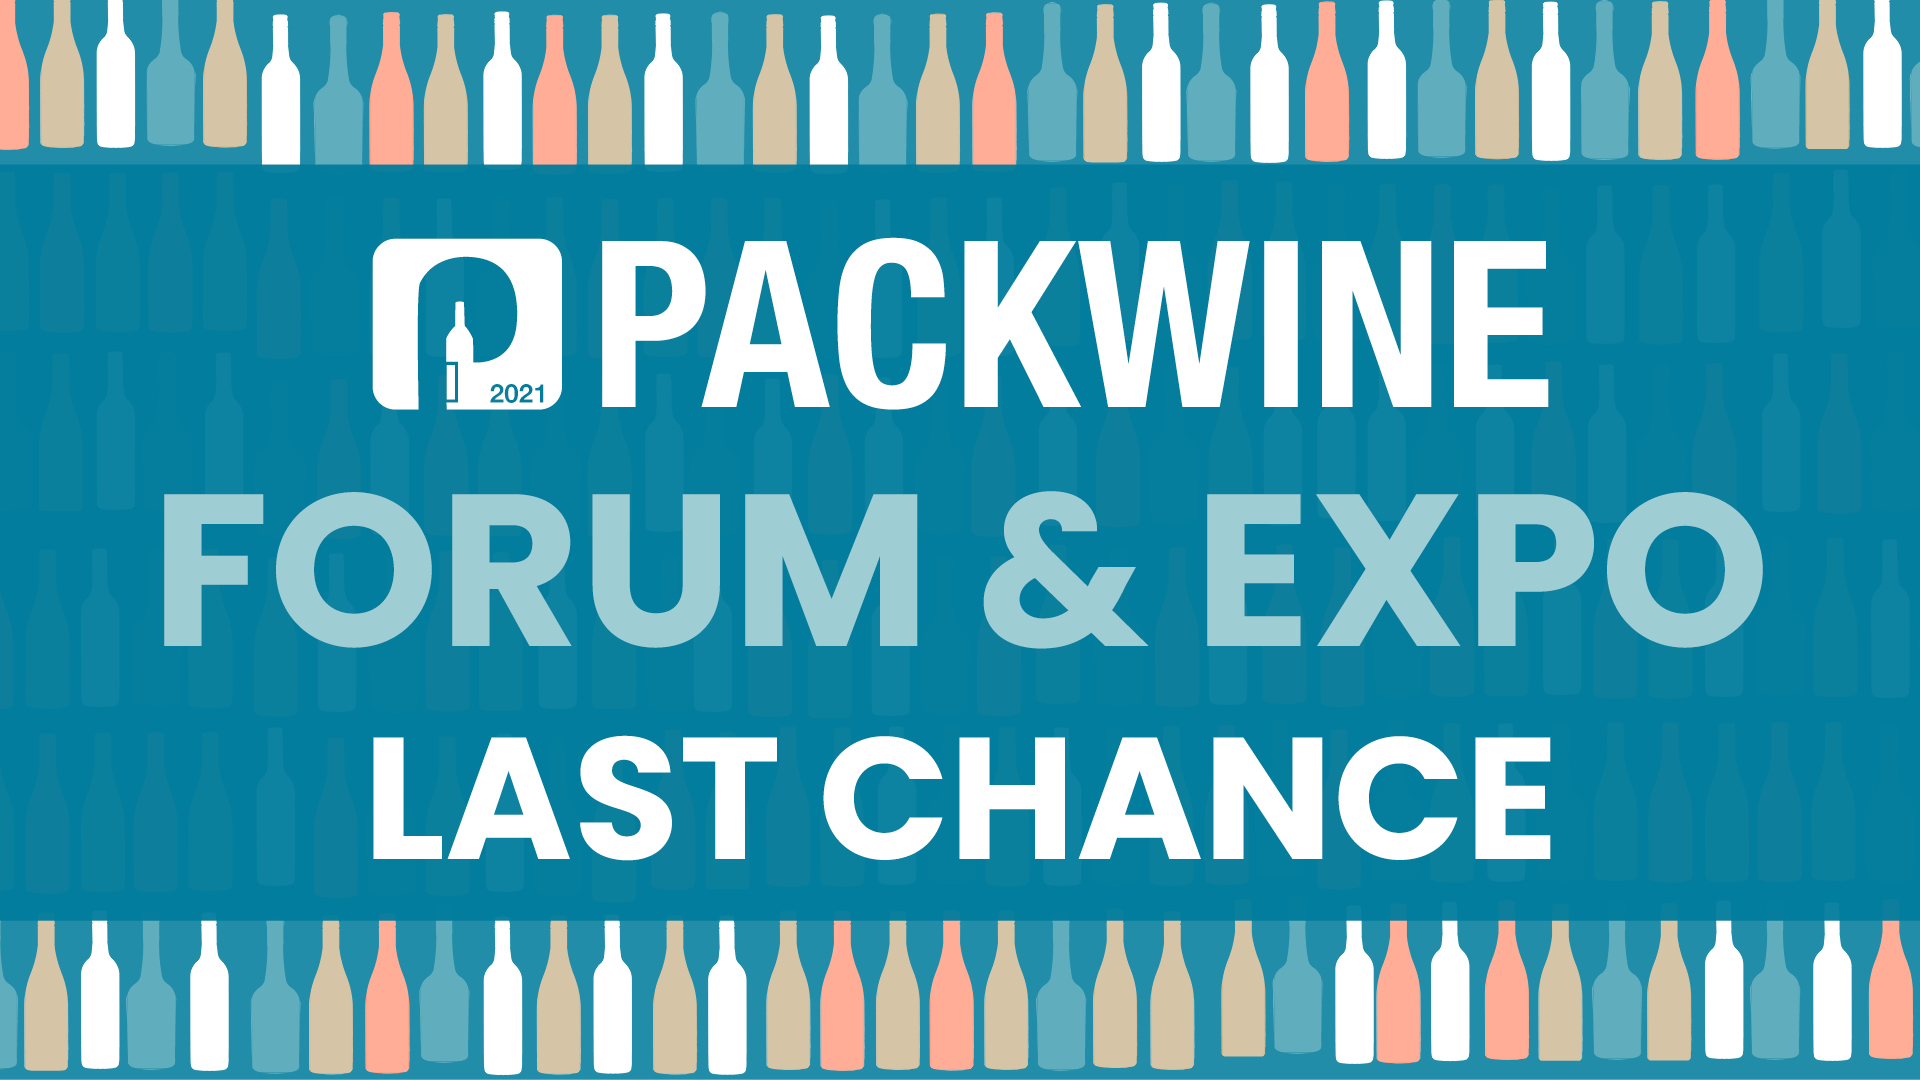 Last chance to visit PACKWINE Forum & Expo – plus a chance to win a VISA gift card!